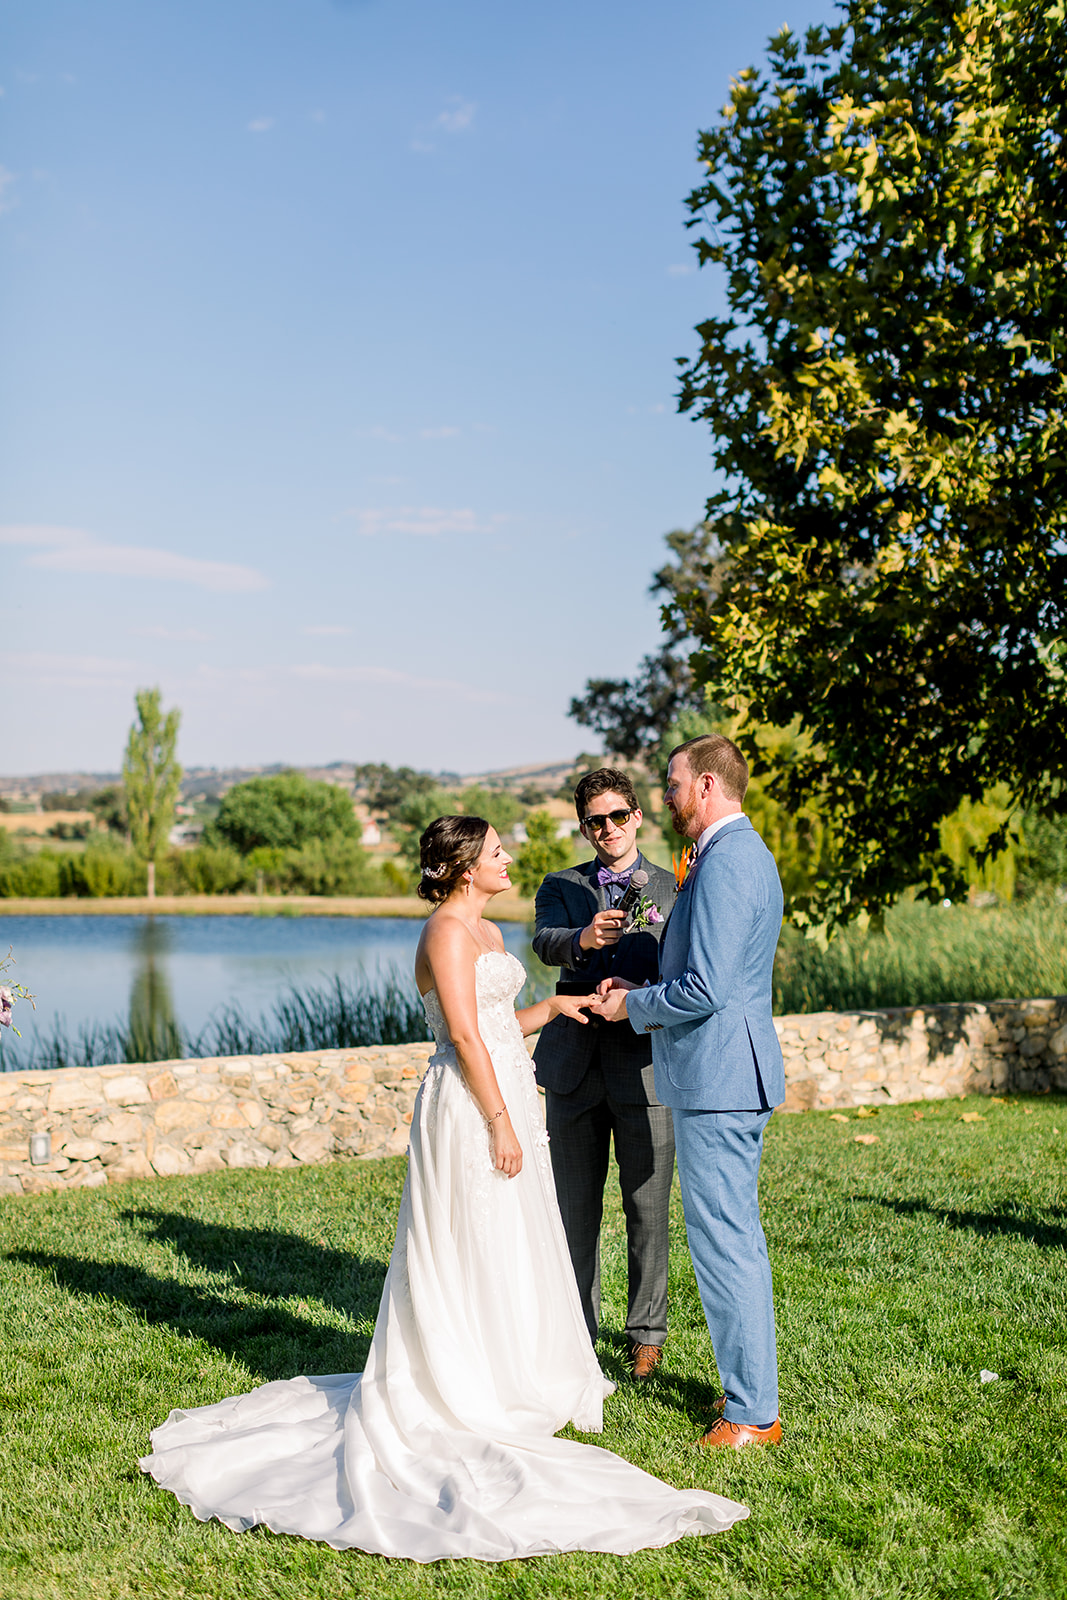 Bride and groom exchange vows by the tranquil pond at Willow and Oak Estate